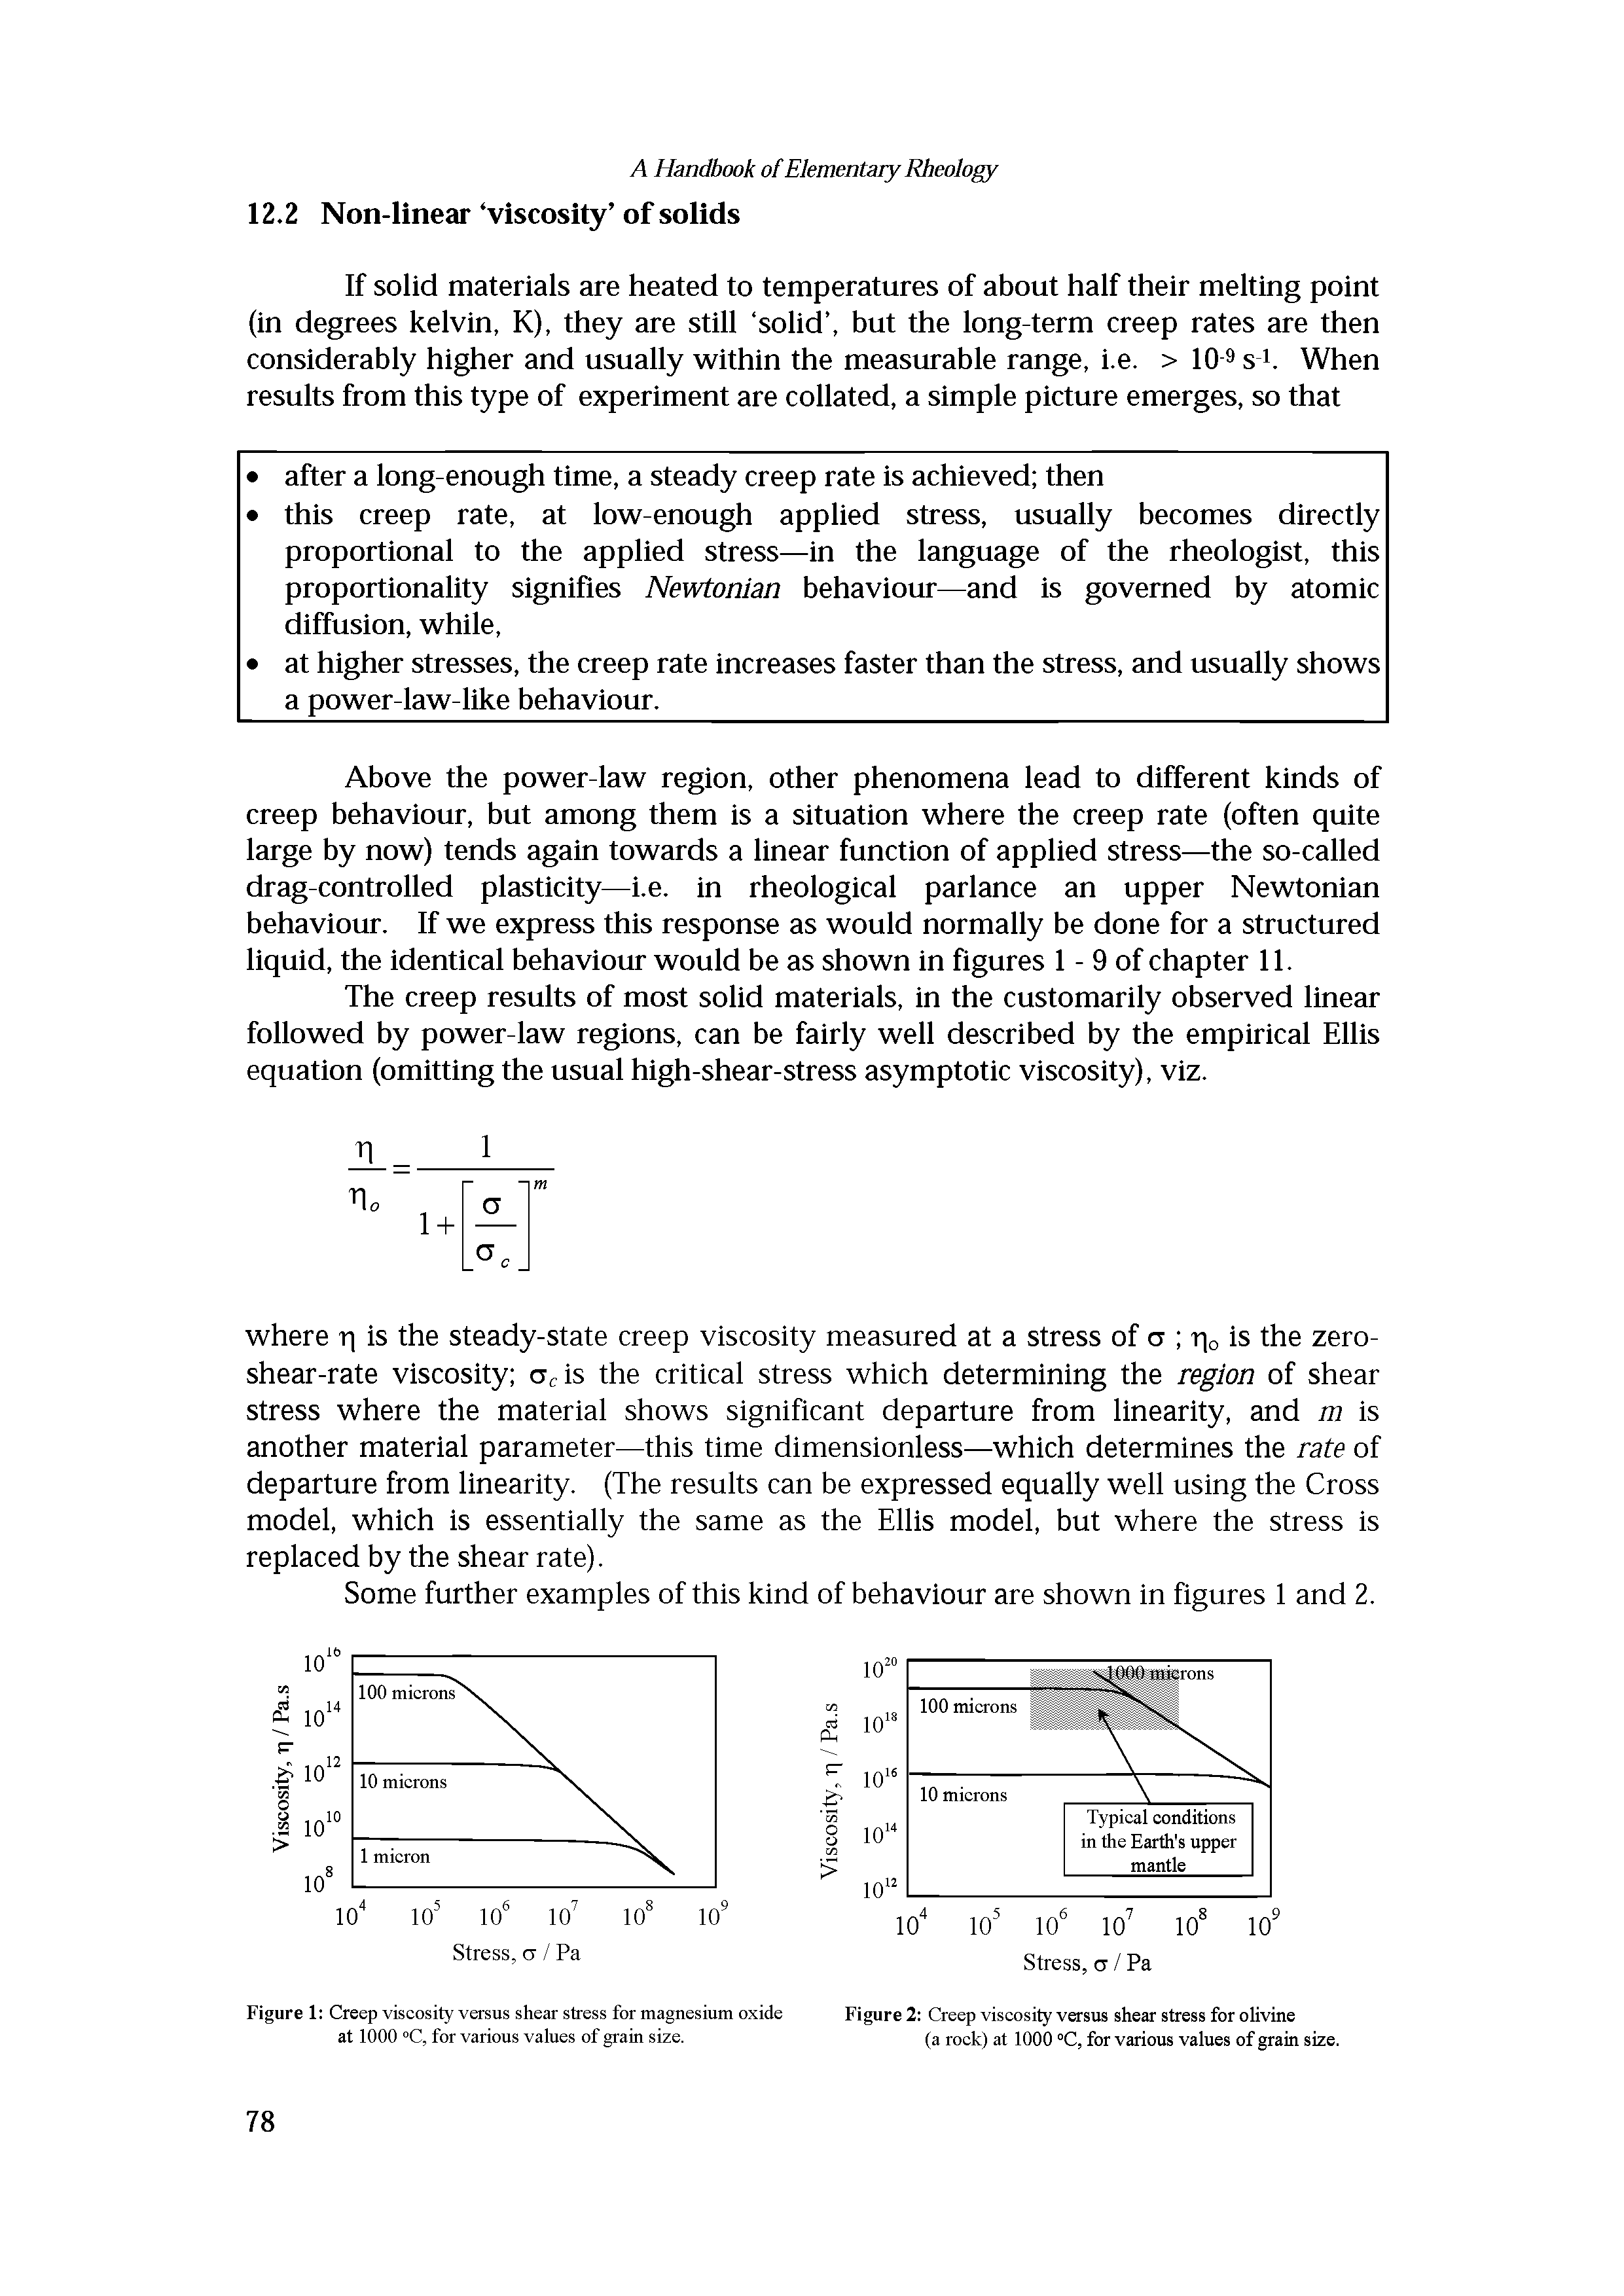 Figure 1 Creep viscosity versus shear stress for magnesium oxide at 1000 °C, for various values of grain size.